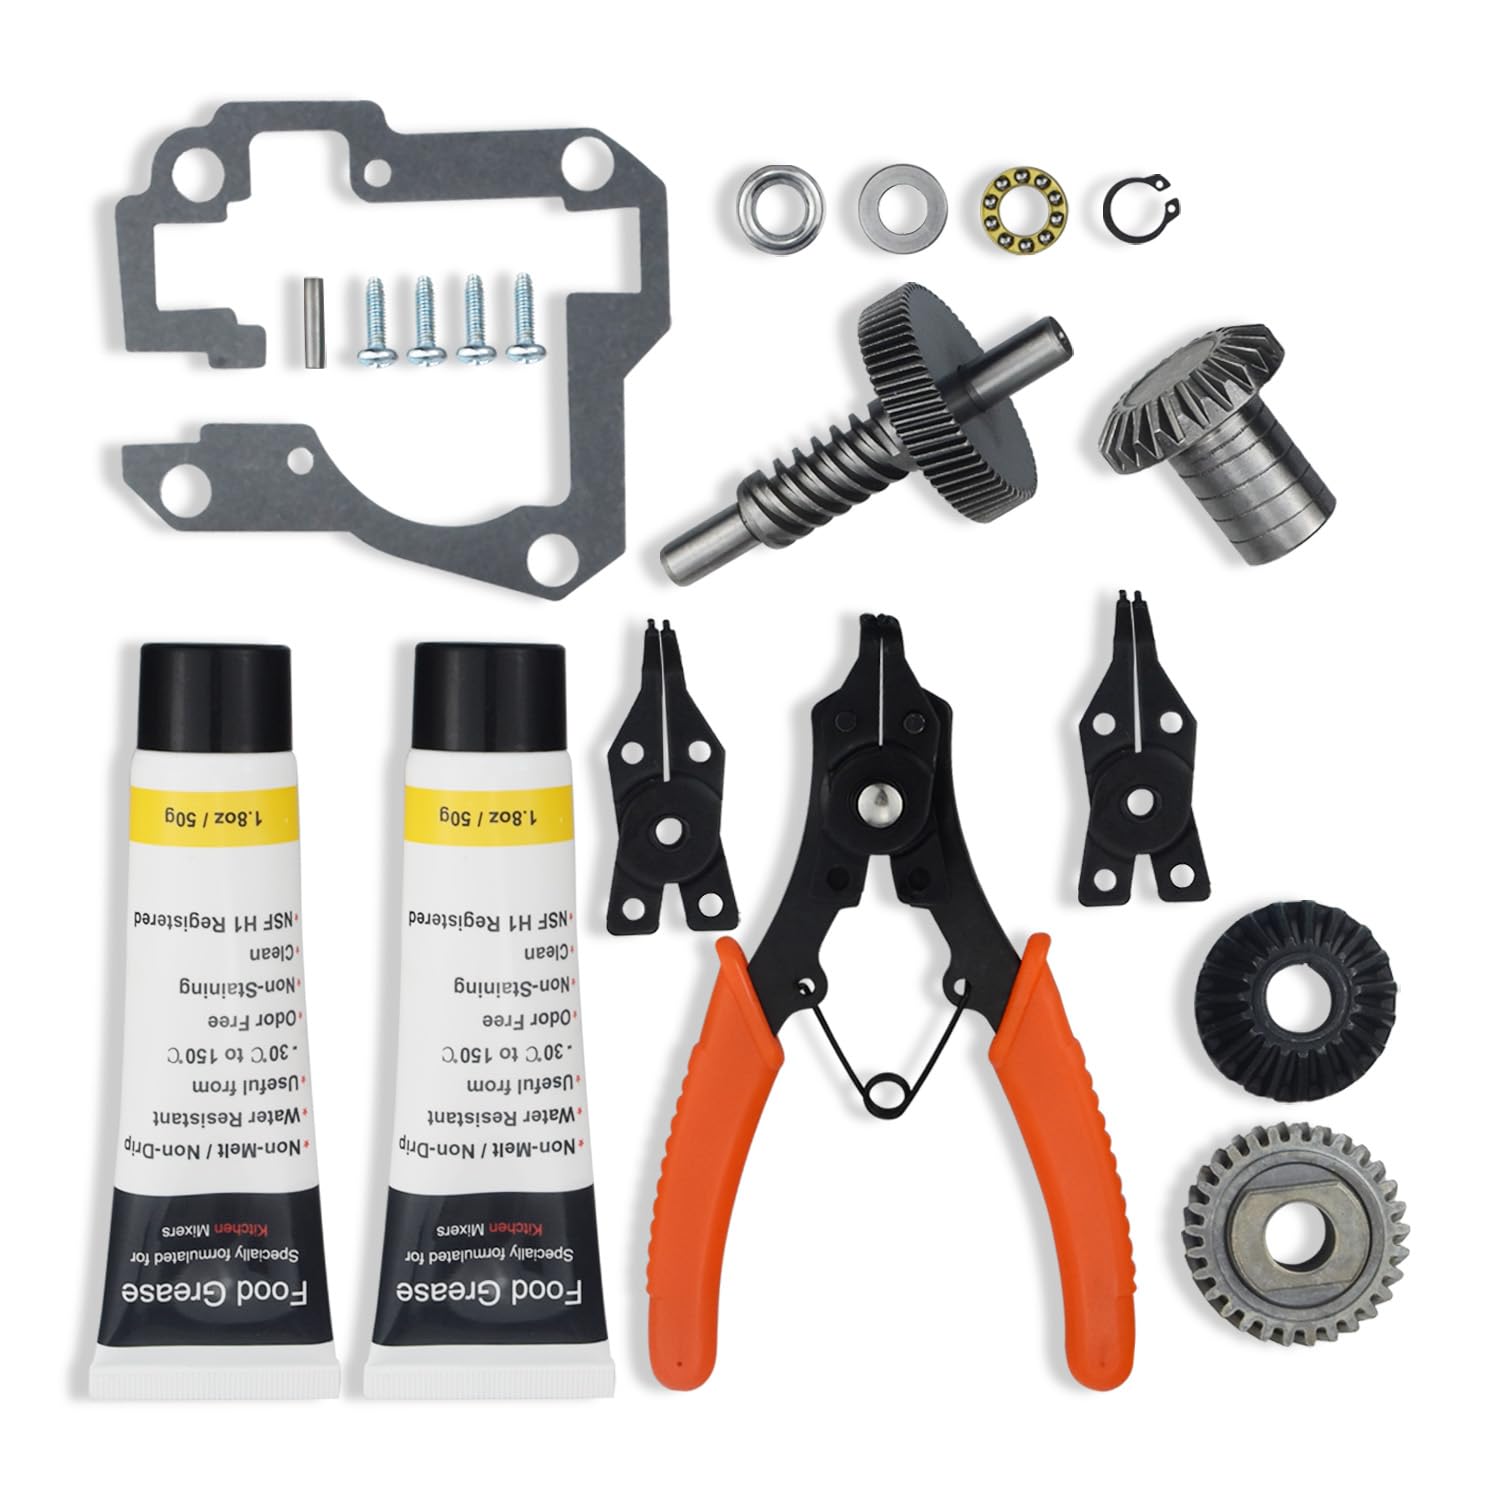 Worm Gear Kit 9706529, 9709511, 9703337, 9709231 Compatible With  Whirlpool/KitchenAid 5QT & 6QT Stand Mixer with Worm Gear, Food Grade Grease,  Retaining Ring Pliers, Mixer Bevel Gear Kit etc